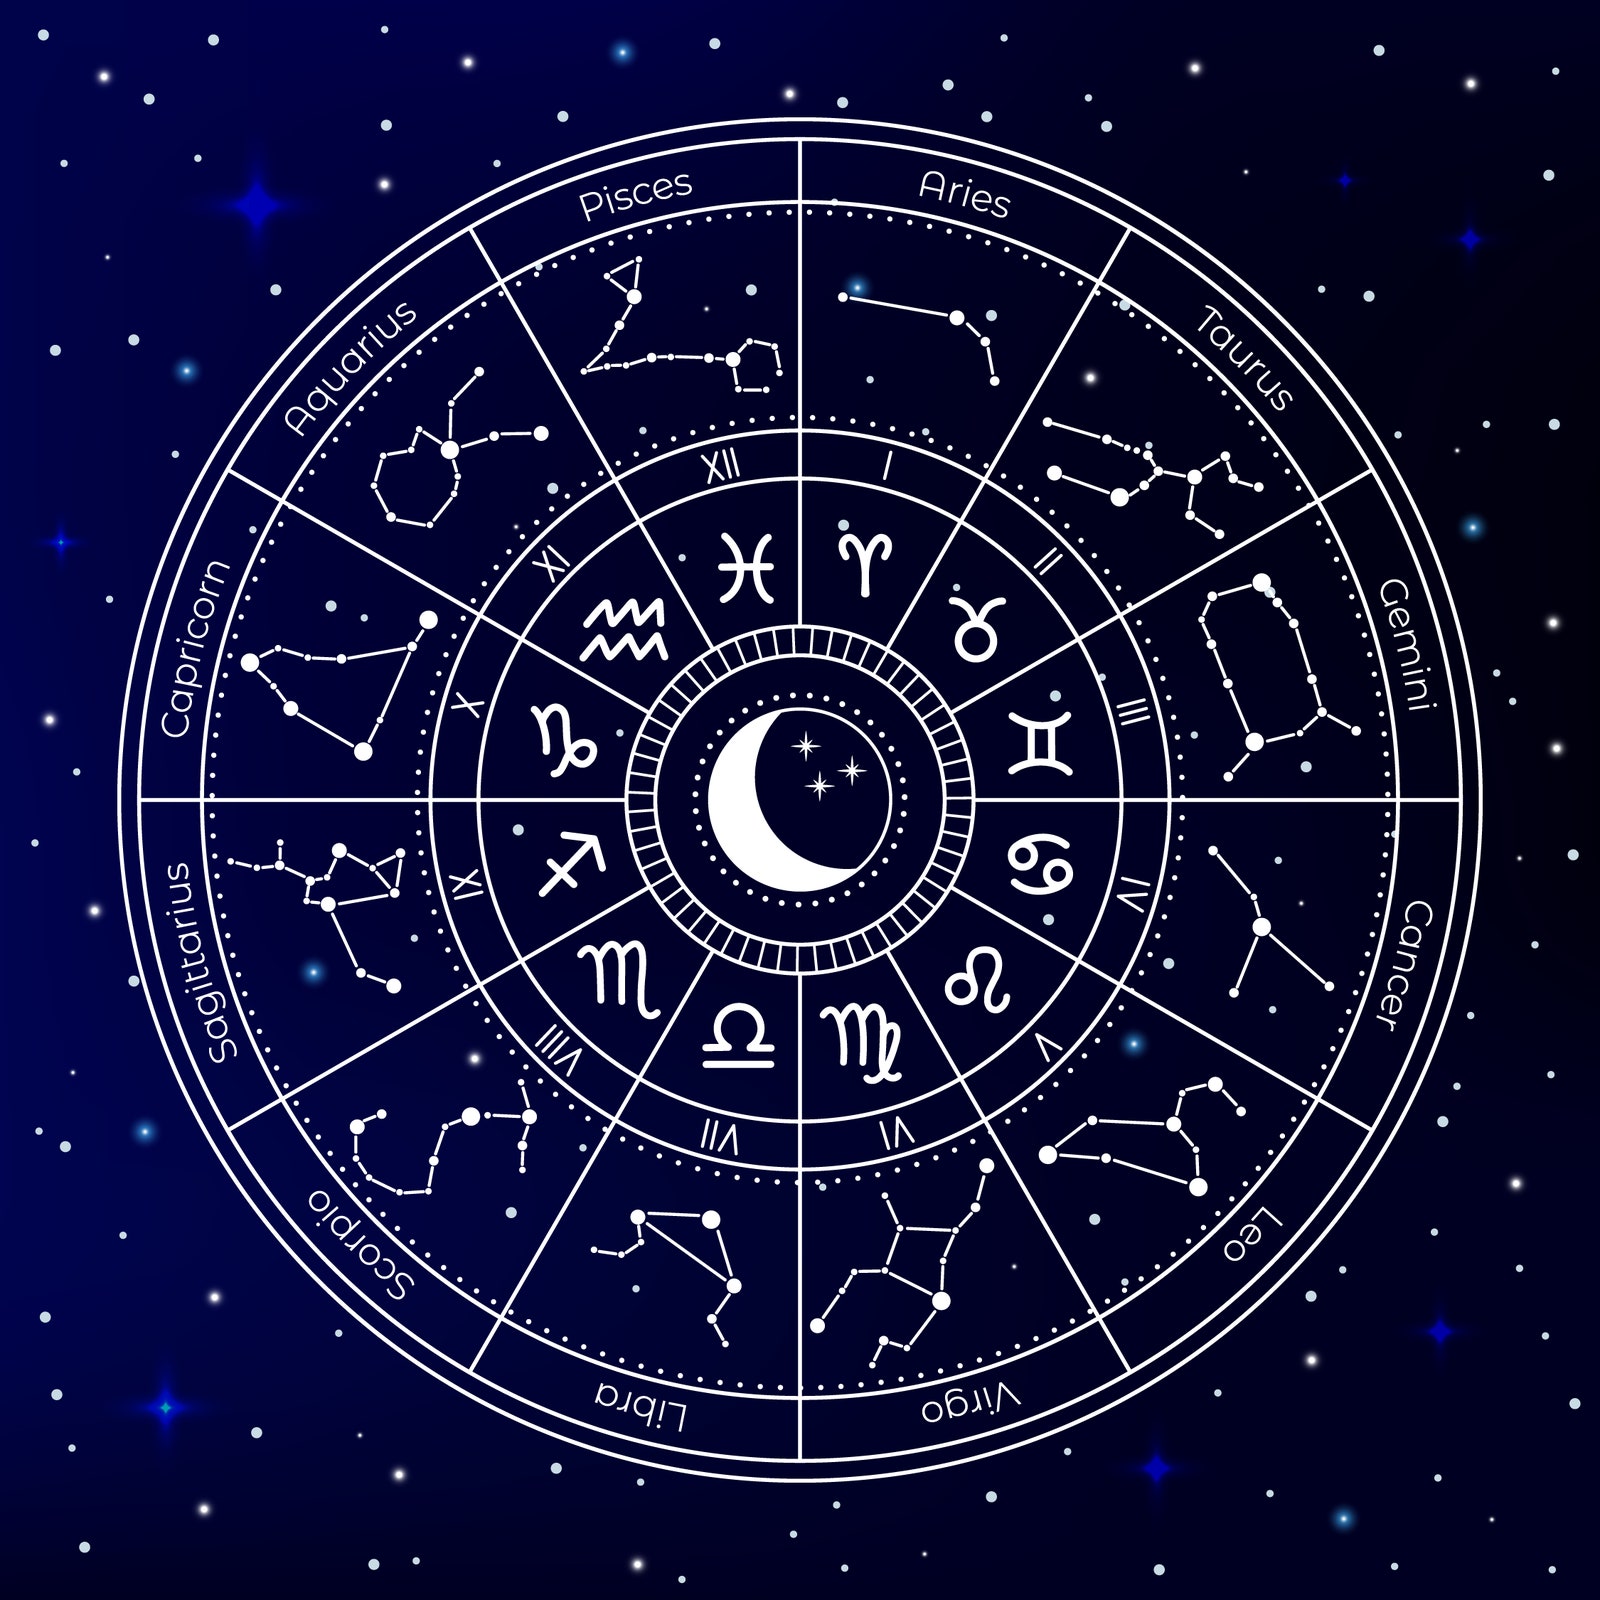 Astrology is an ancient Indian science that clarifies movements.